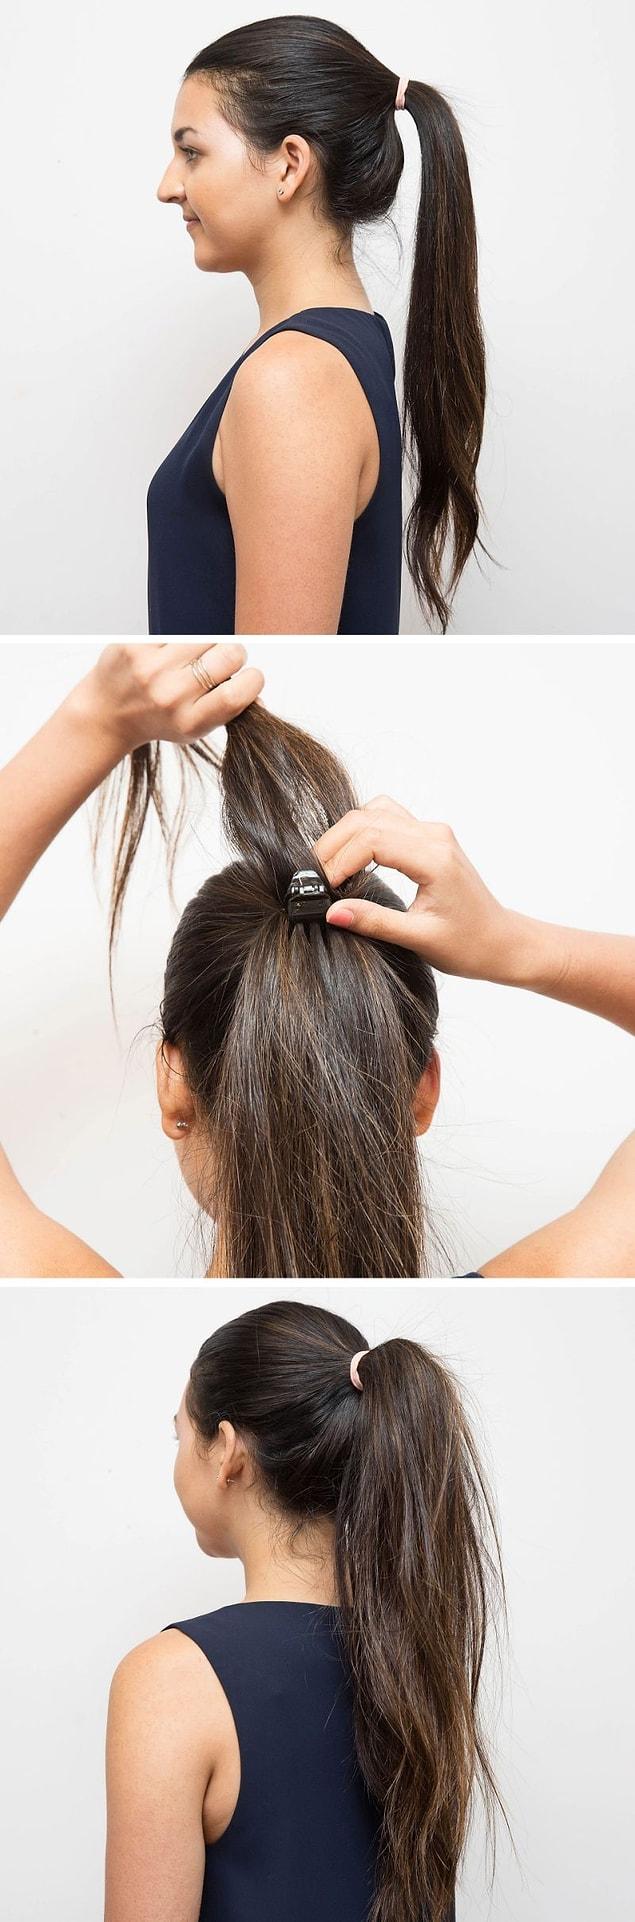 5. You can add an extra hair clip to your ponytail to make it look bigger.